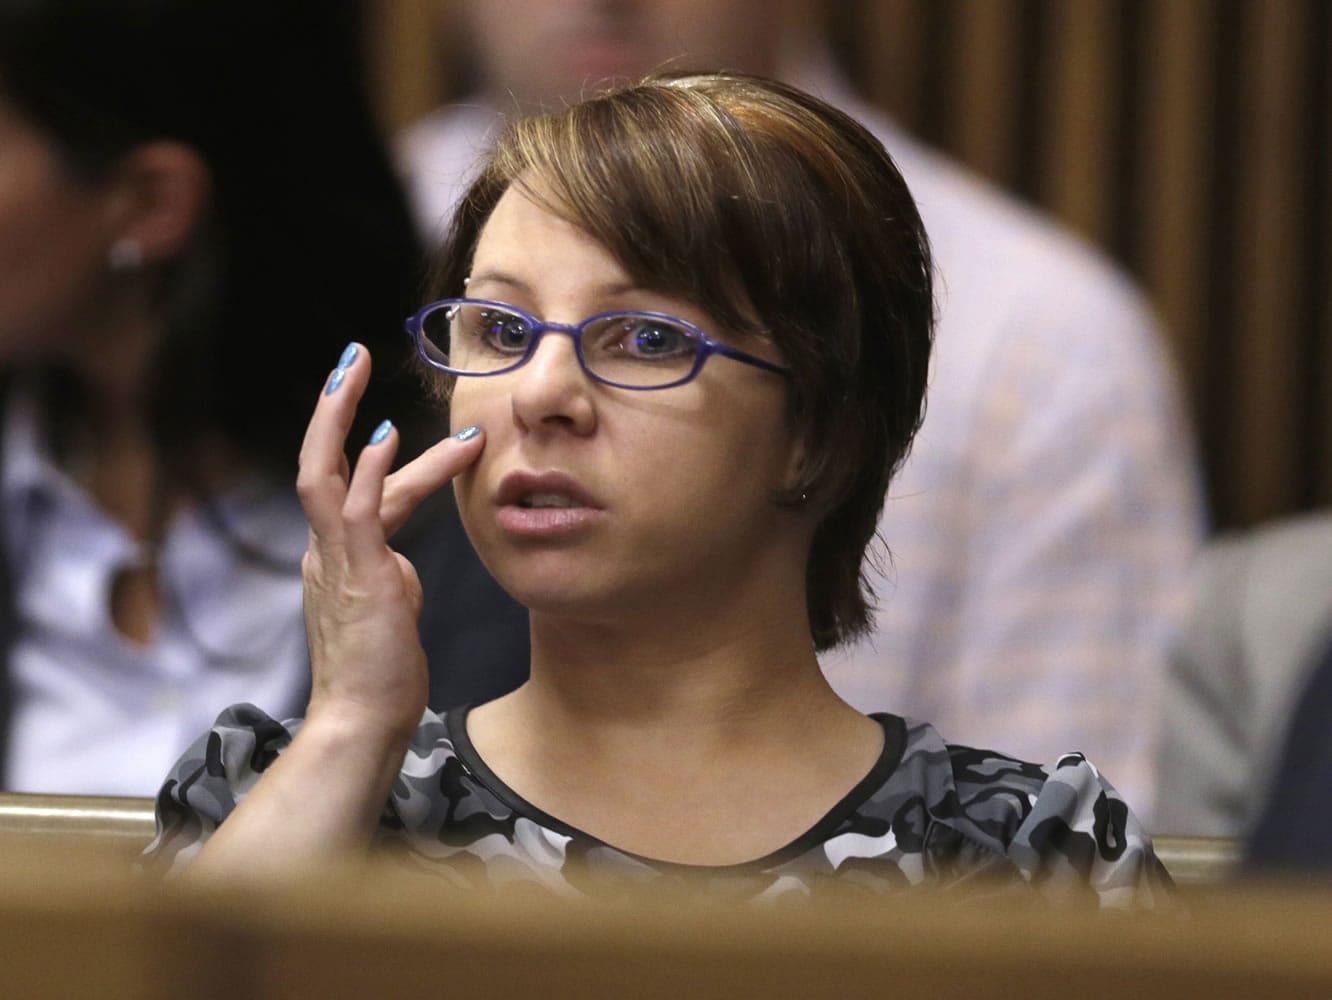 Michelle Knight sits in the courtroom during a break in the sentencing phase for Ariel Castro in Cleveland.